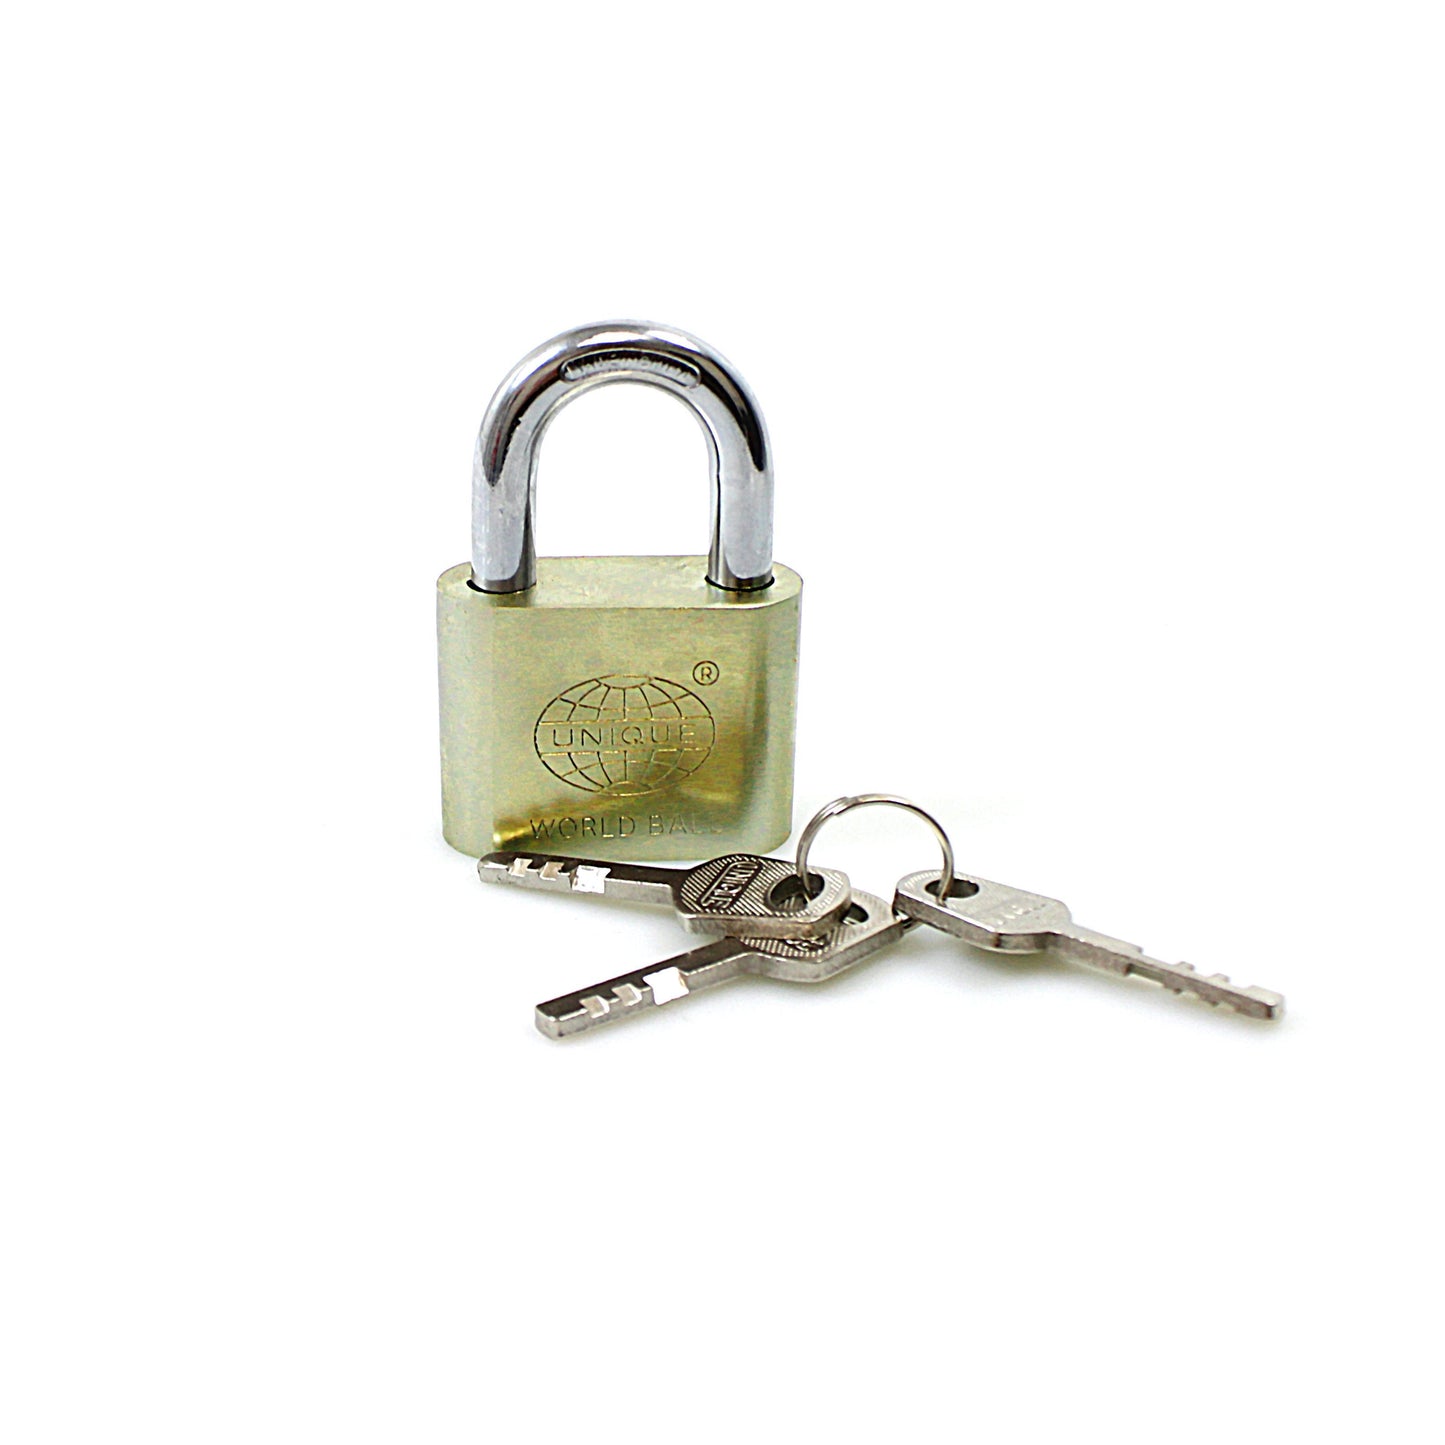 World Ball Unique Padlock 60mm Long 0251 (Large Letter Rate)